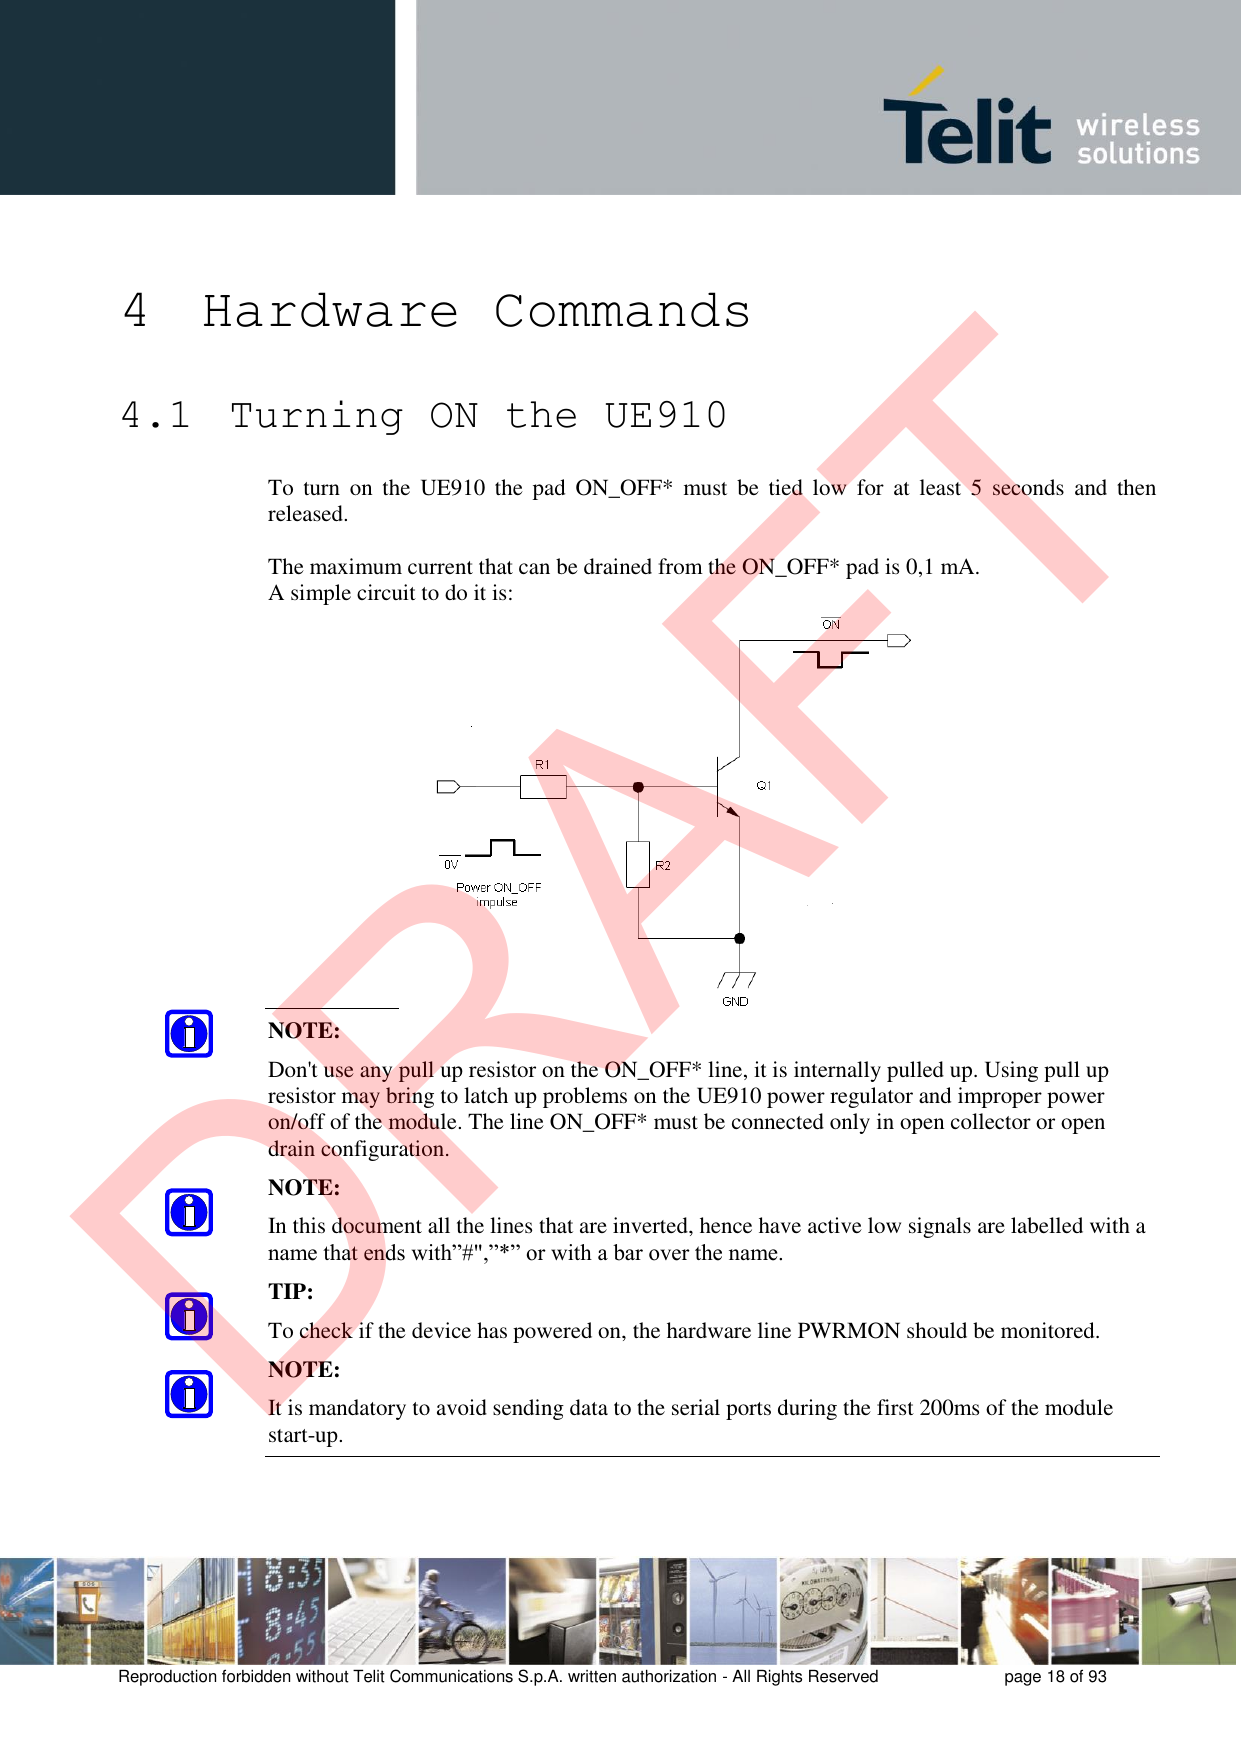 Reproduction forbidden without Telit Communications S.p.A. written authorization - All Rights Reserved  page 18 of 93 4 Hardware Commands 4.1  Turning ON the UE910 To  turn  on  the  UE910  the  pad  ON_OFF*  must  be  tied  low  for  at  least  5  seconds  and  then released. The maximum current that can be drained from the ON_OFF* pad is 0,1 mA. A simple circuit to do it is: NOTE: Don&apos;t use any pull up resistor on the ON_OFF* line, it is internally pulled up. Using pull up resistor may bring to latch up problems on the UE910 power regulator and improper power on/off of the module. The line ON_OFF* must be connected only in open collector or open drain configuration. NOTE: In this document all the lines that are inverted, hence have active low signals are labelled with a name that ends with”#&quot;,”*” or with a bar over the name. TIP: To check if the device has powered on, the hardware line PWRMON should be monitored. NOTE: It is mandatory to avoid sending data to the serial ports during the first 200ms of the module start-up. DRAFT